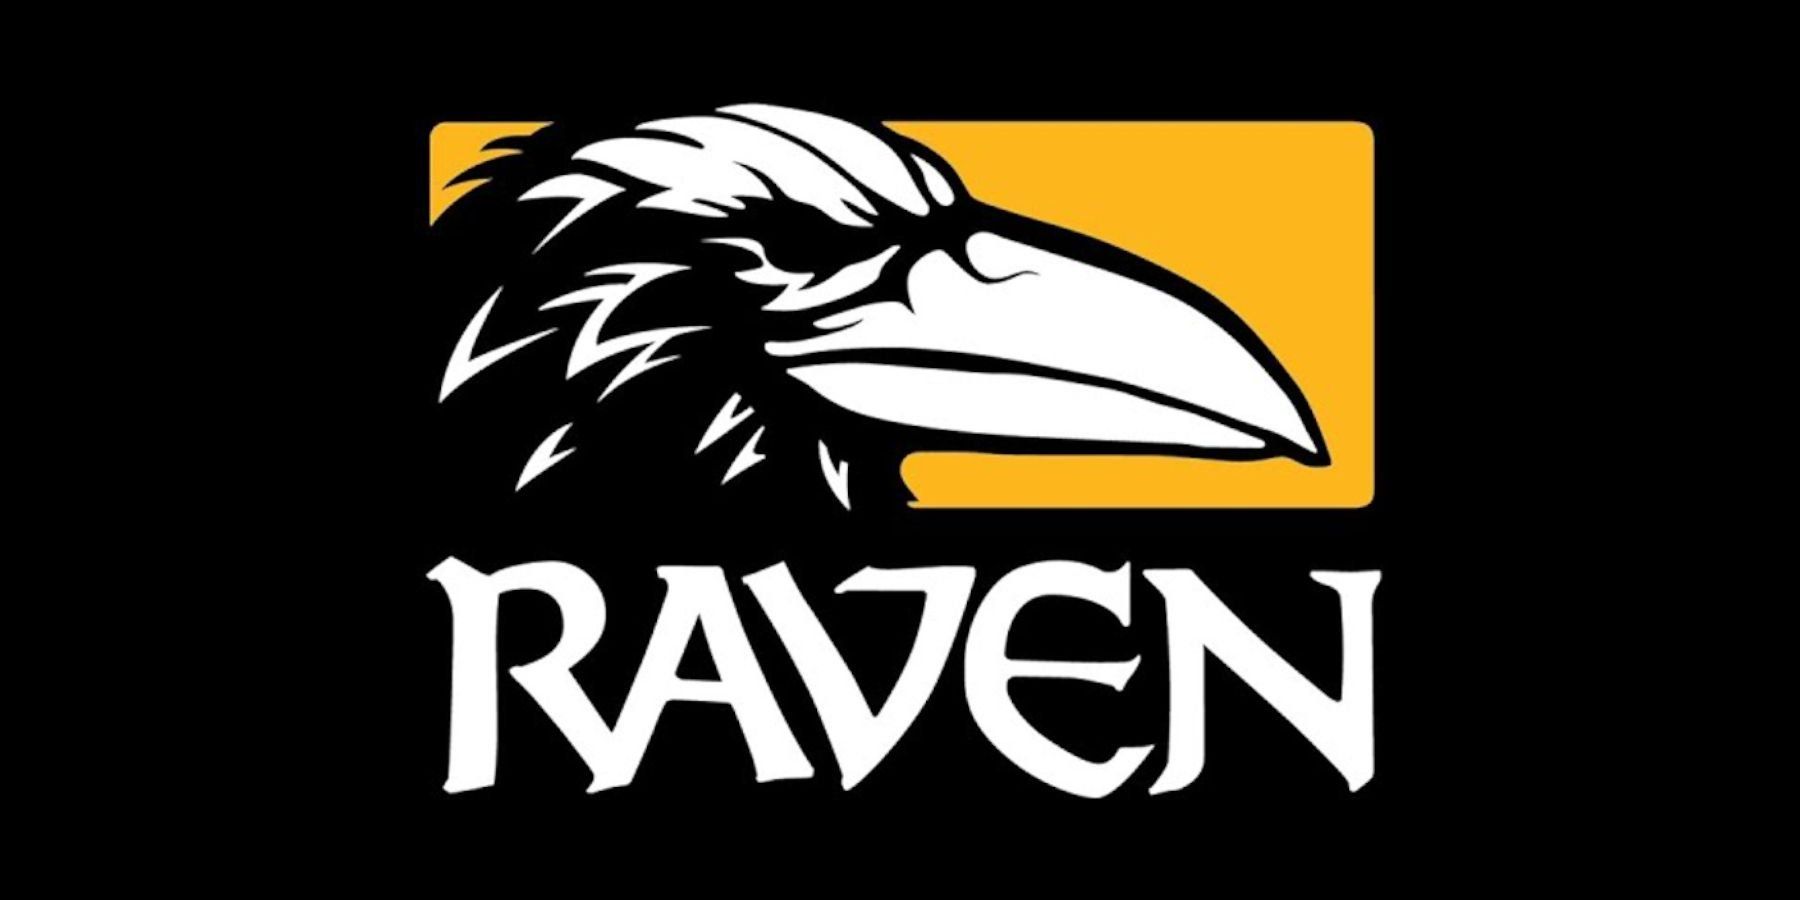 Image for Xbox's Phil Spencer reiterates company will recognize Raven's union once Activision Blizzard deal is complete